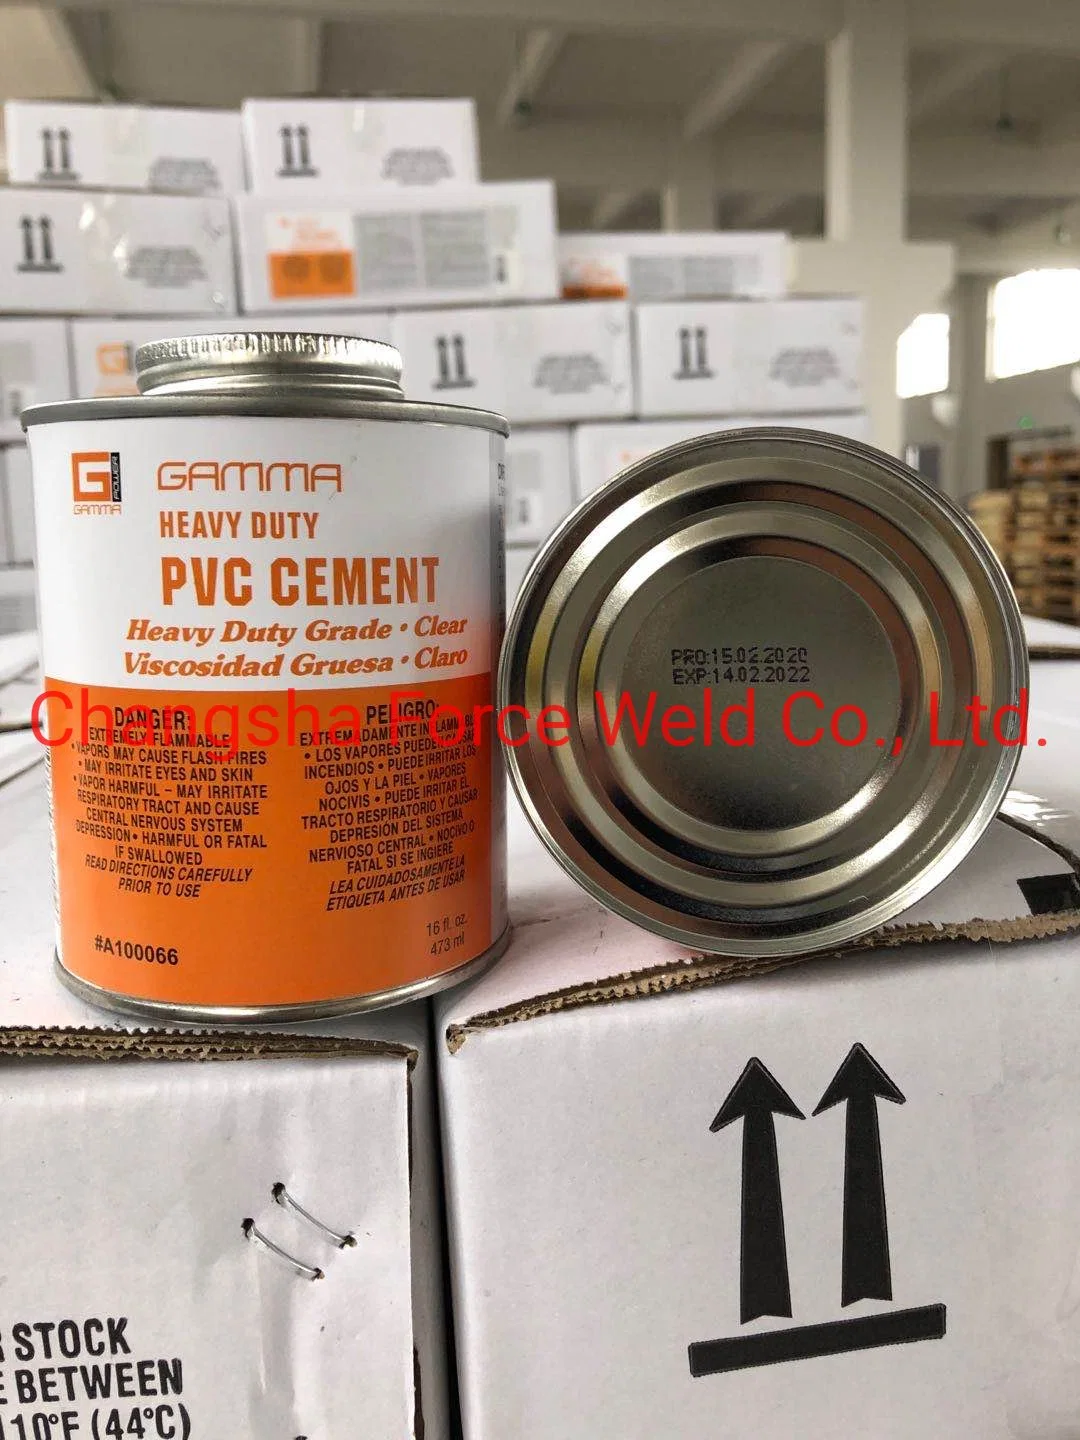 Hot! ! ! PVC Glue/Cement/Adhesive/Pipe Cement/Pipe Glue Heavy Duty USA Quality